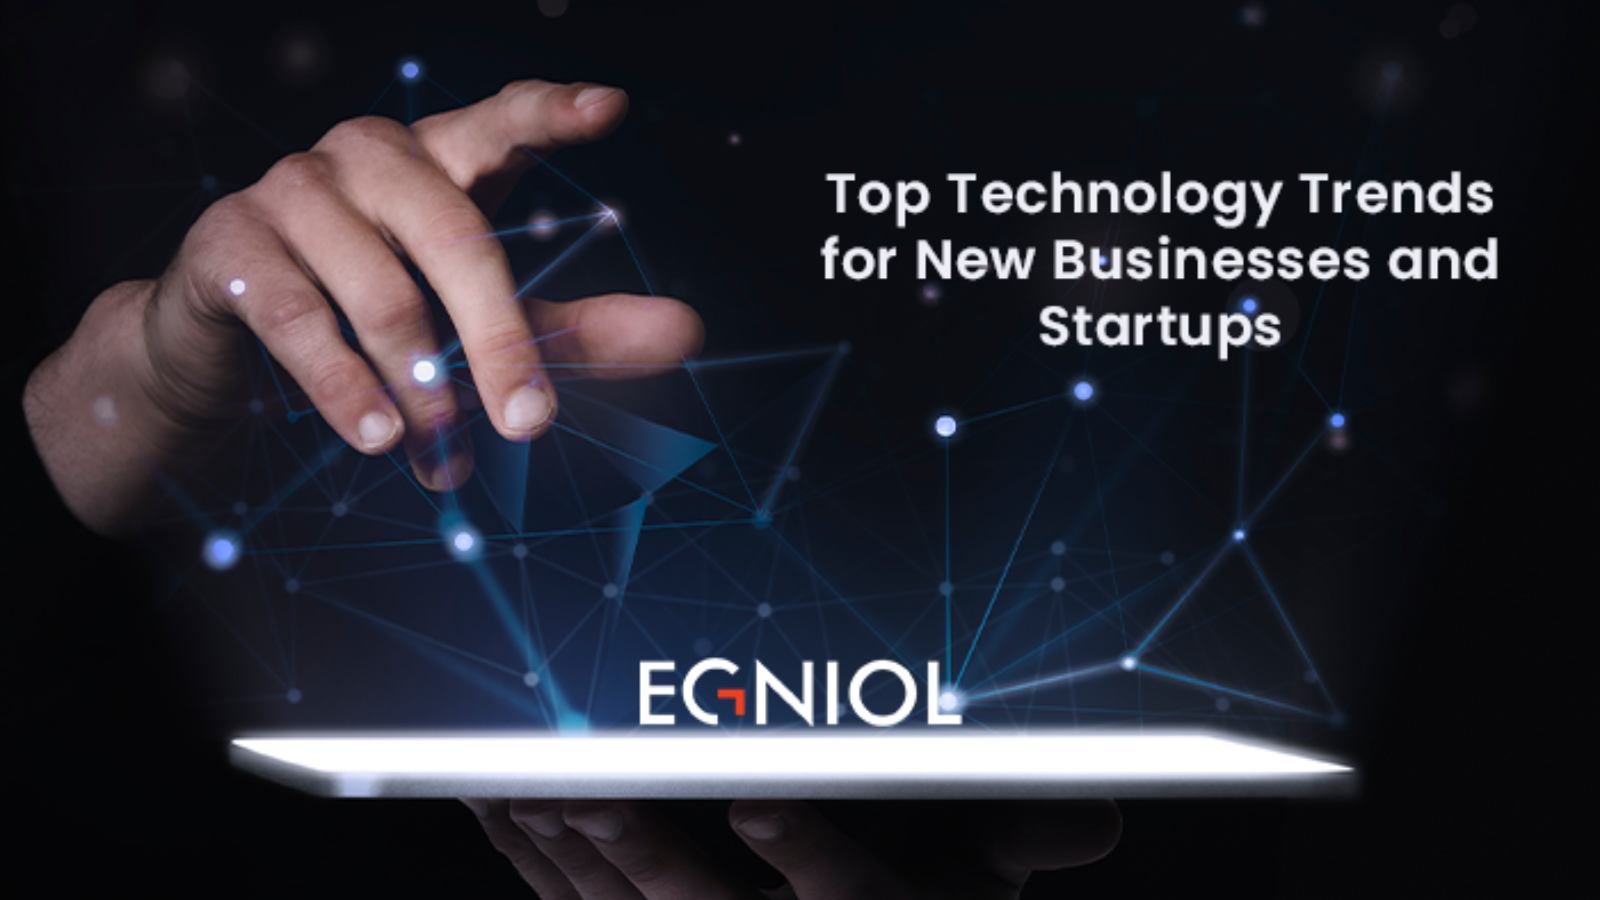 Top Technology Trends for New Businesses and Startups - Egniol